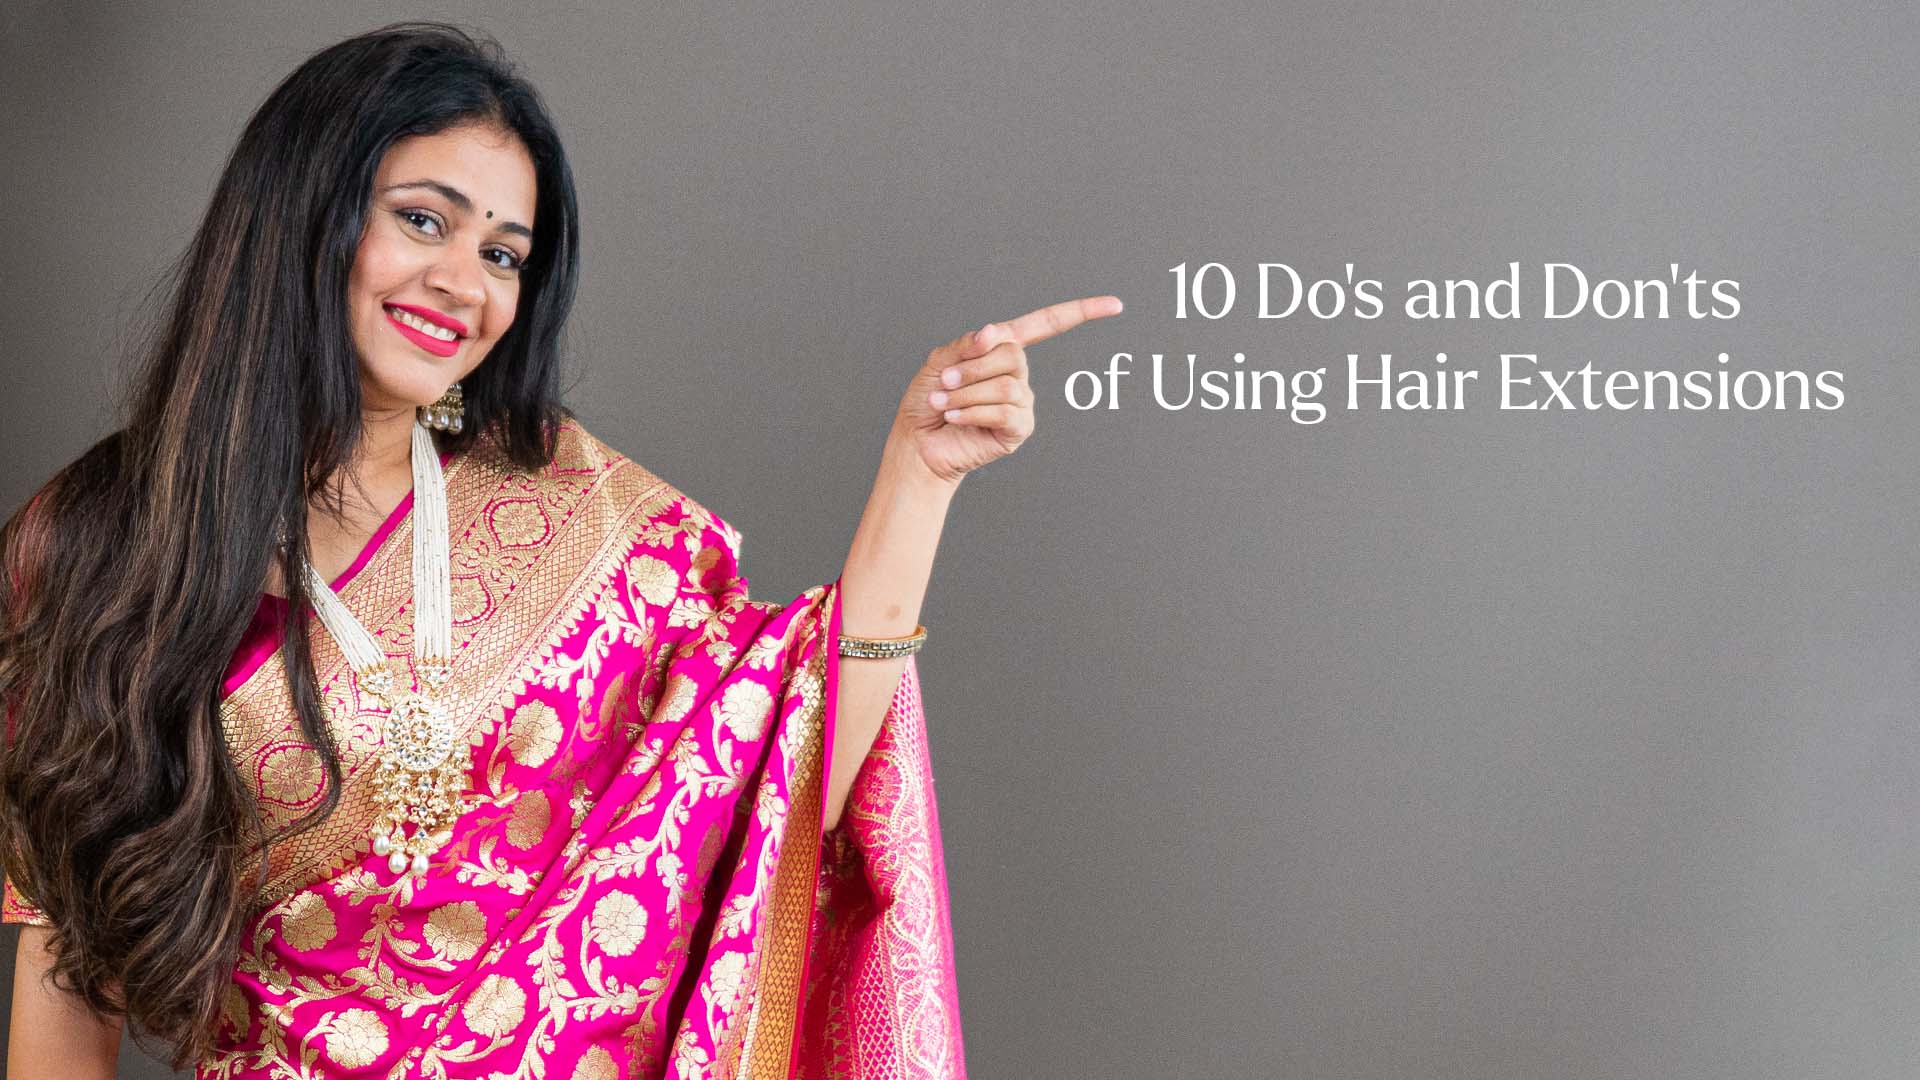 Do's and Don'ts of Using Hair Extensions for a Fabulous Hairstyle